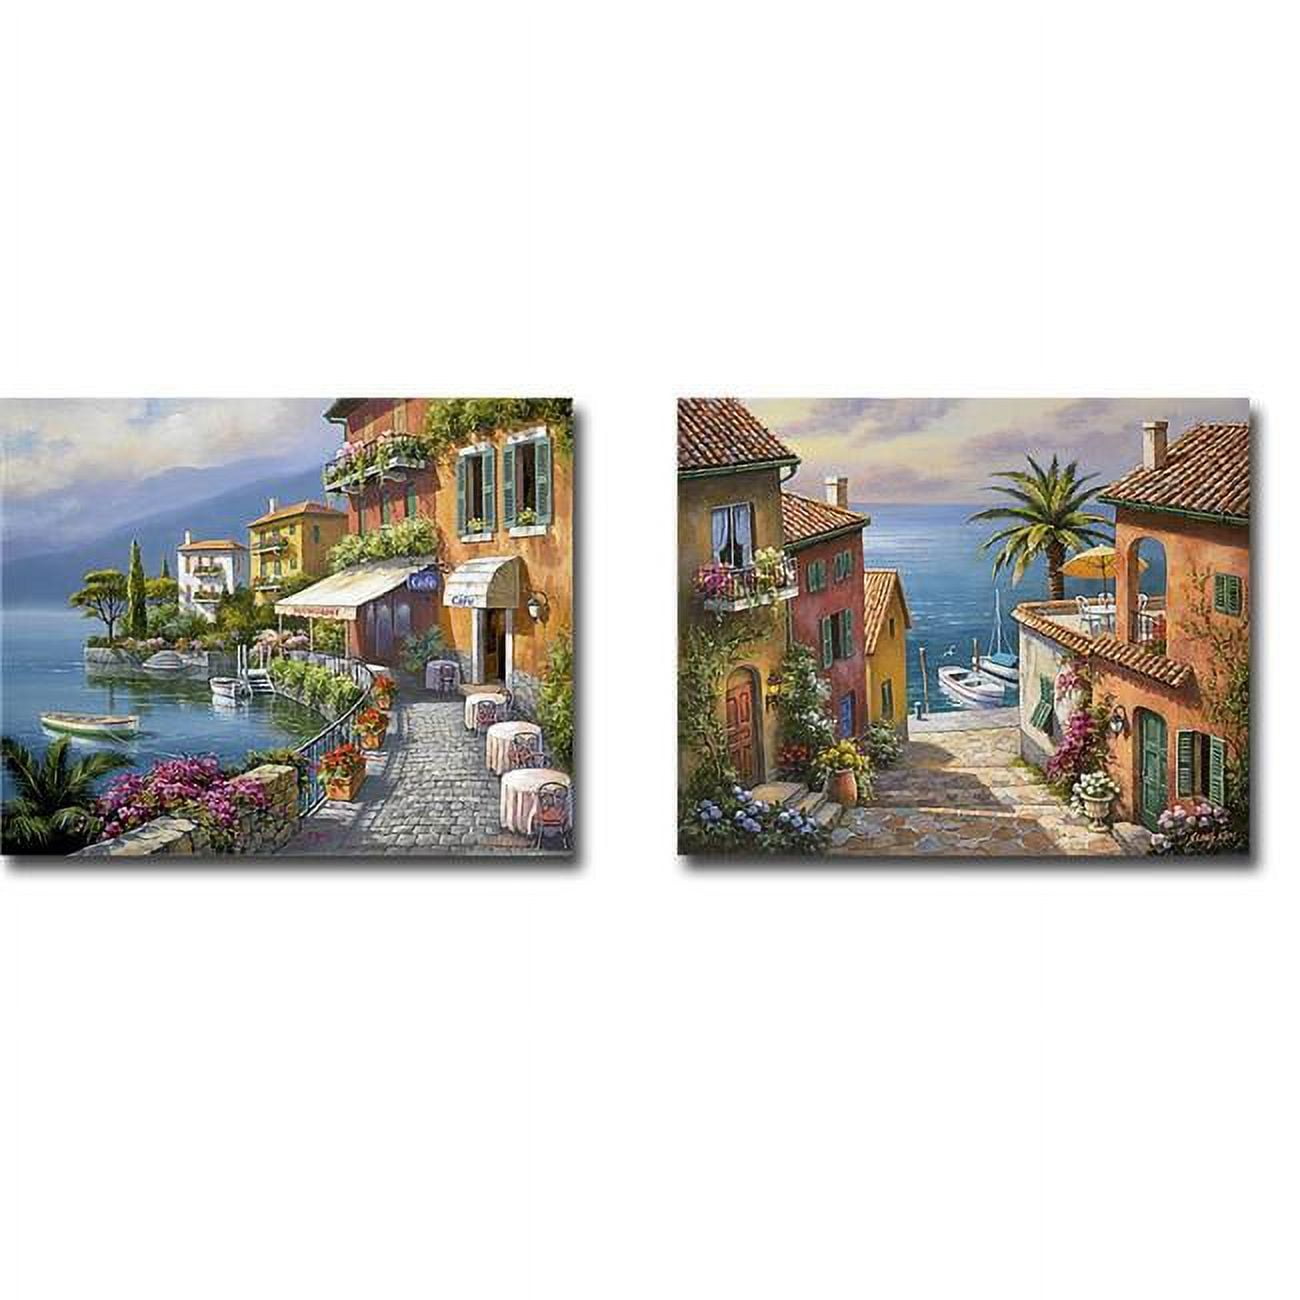 1620475ig Seaside Bistro Cafe & The Villas Private Dock By Sung Kim Premium Gallery Wrapped Canvas Giclee Art Set - Ready-to-hang, 16 X 20 In.